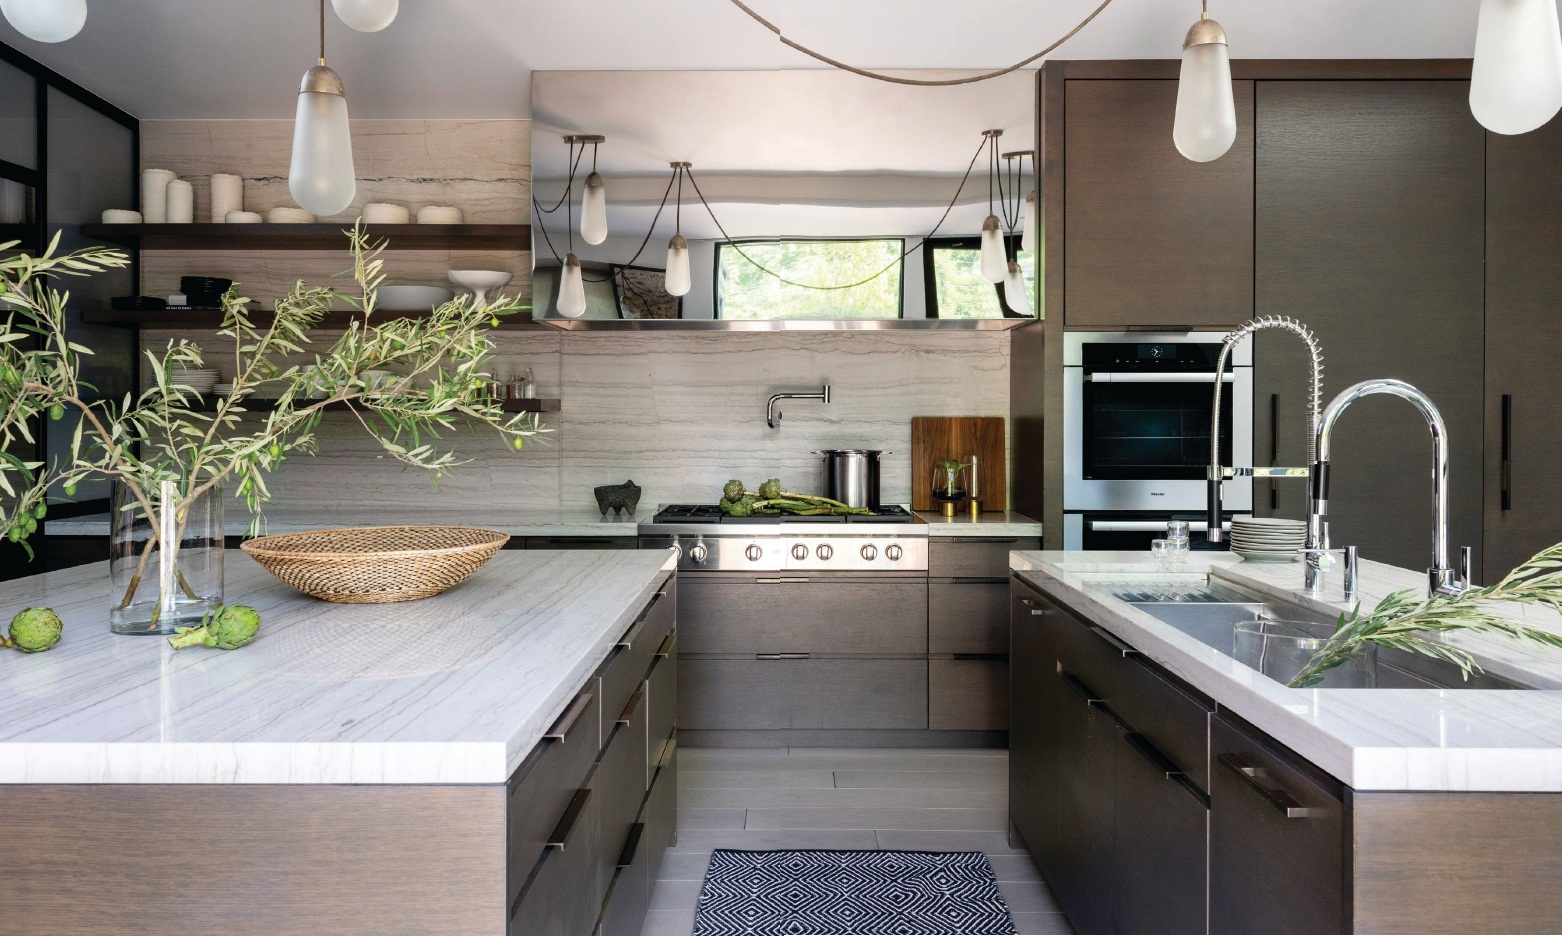 Lariat pendants by Apparatus add a chic touch in the kitchen. Photographed by Aimée Mazzenga